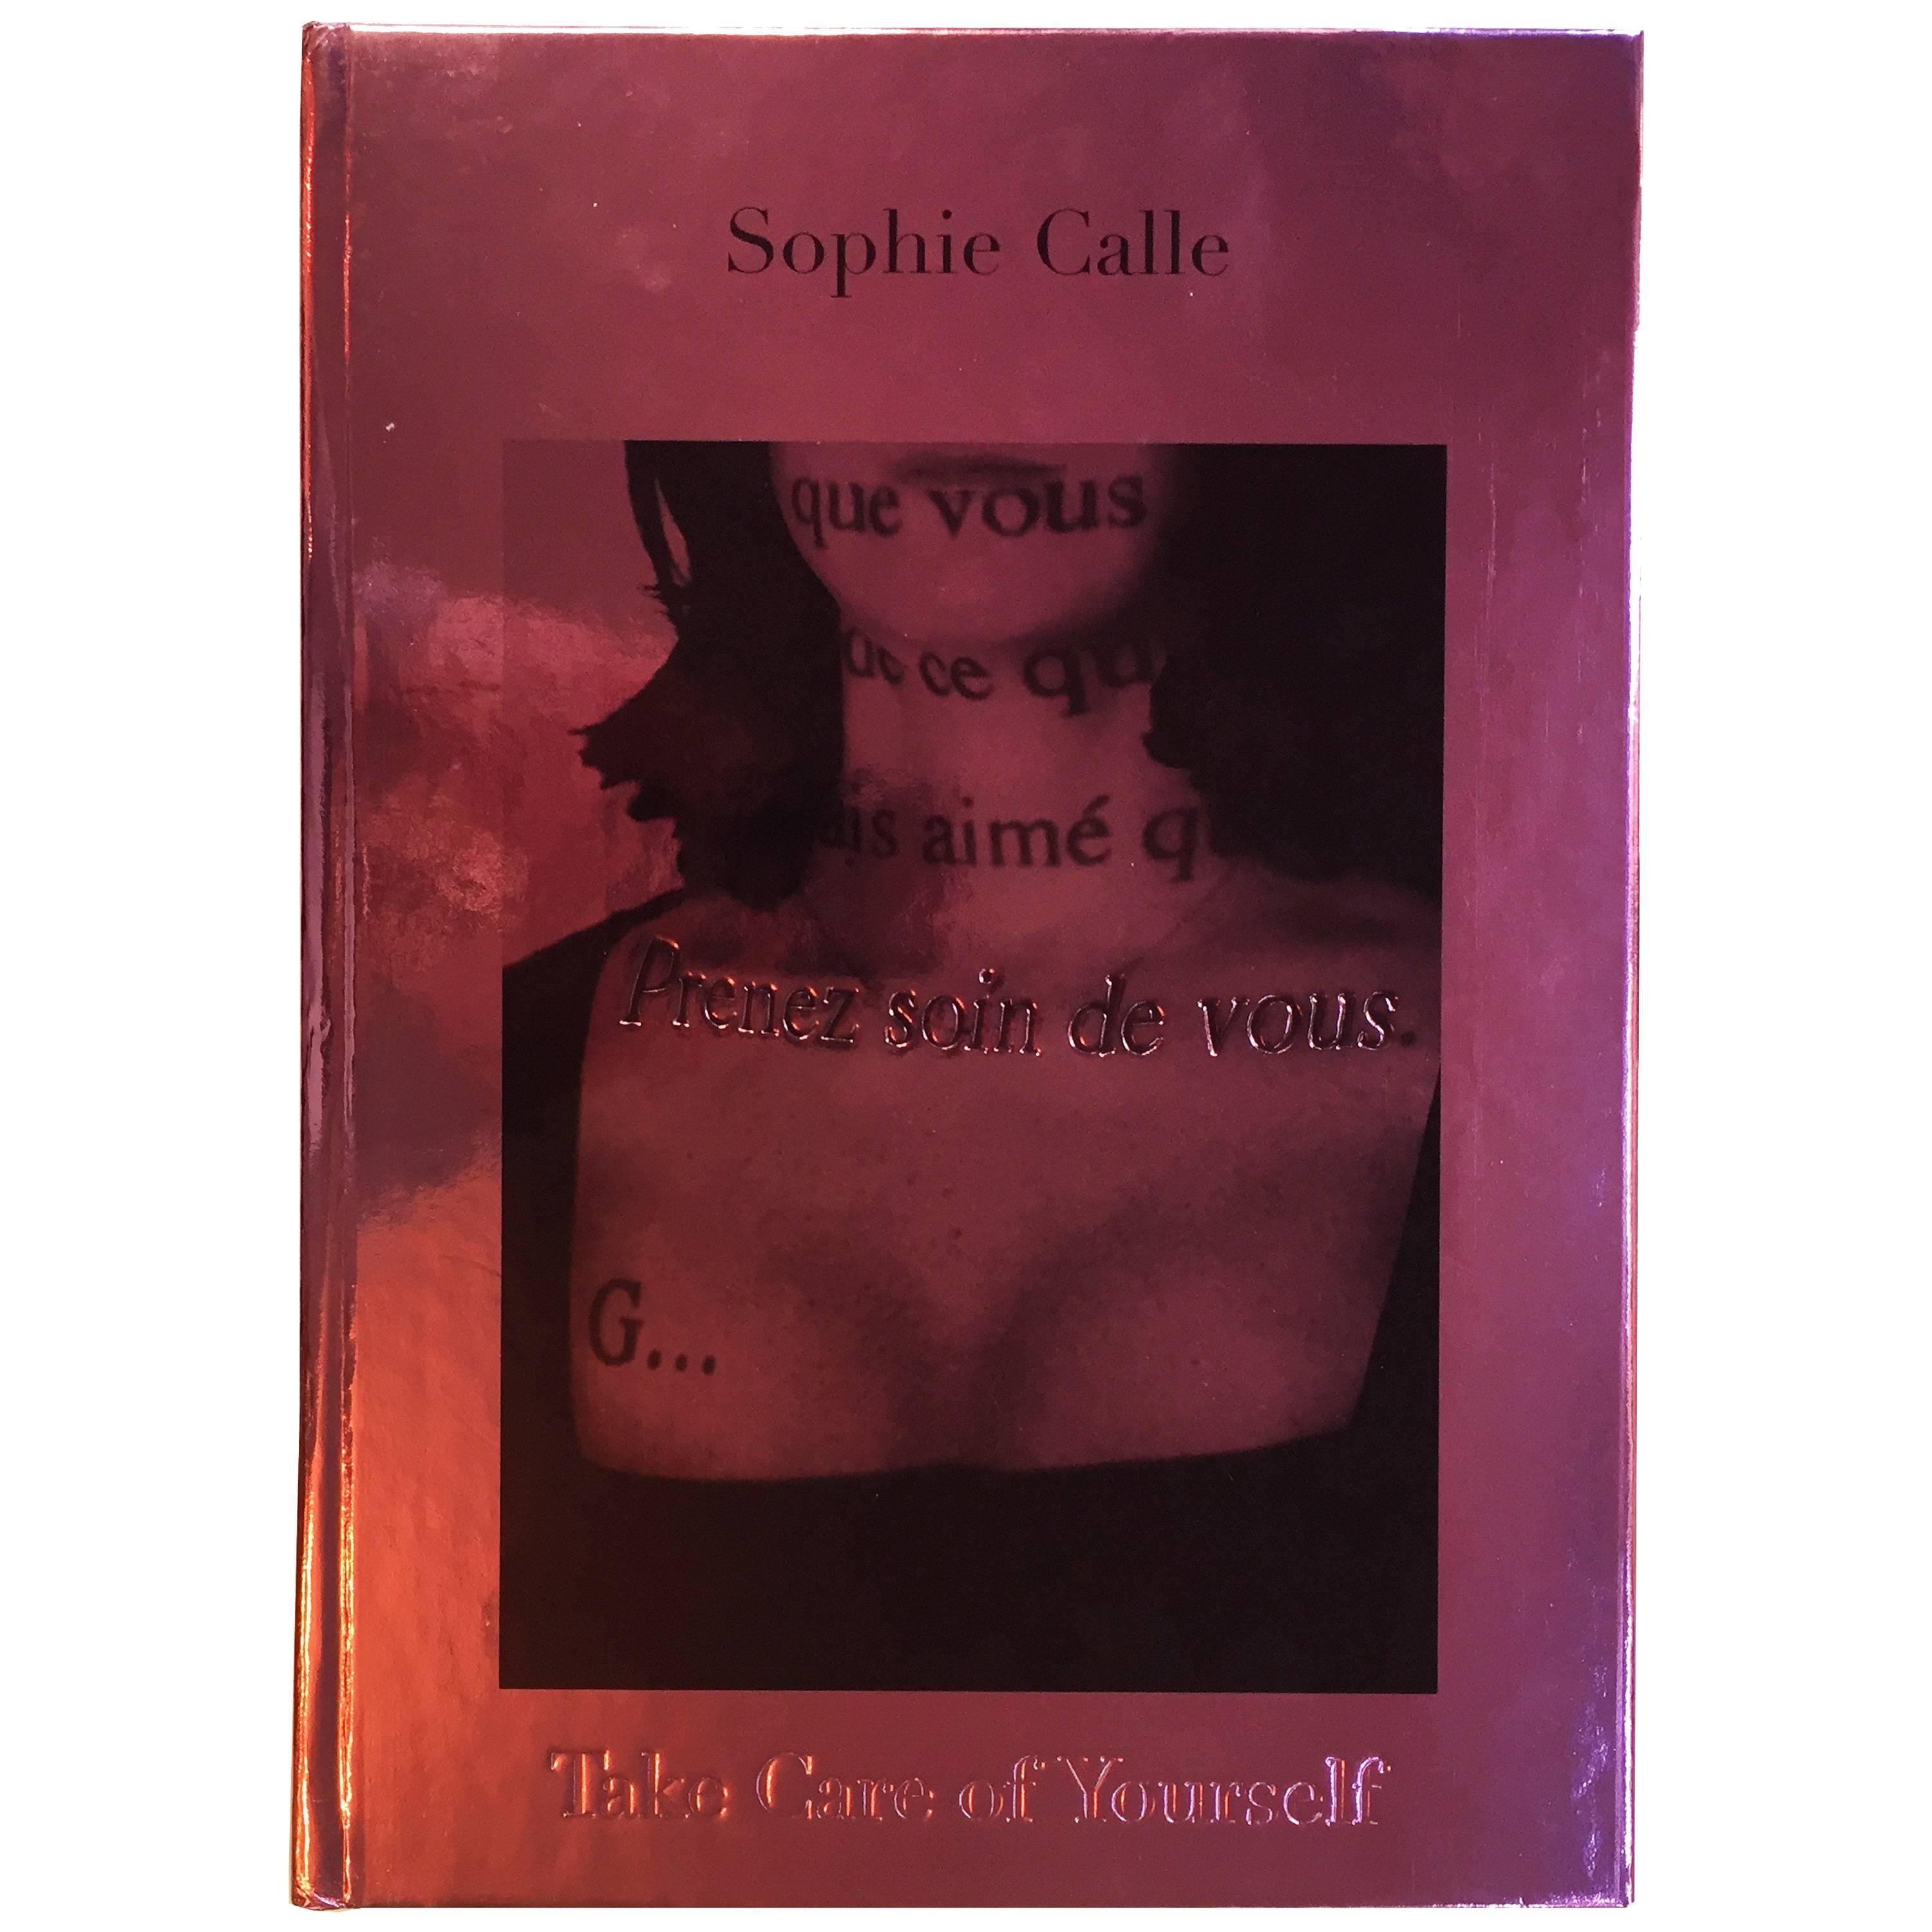 Sophie Calle – Take Care of Yourself